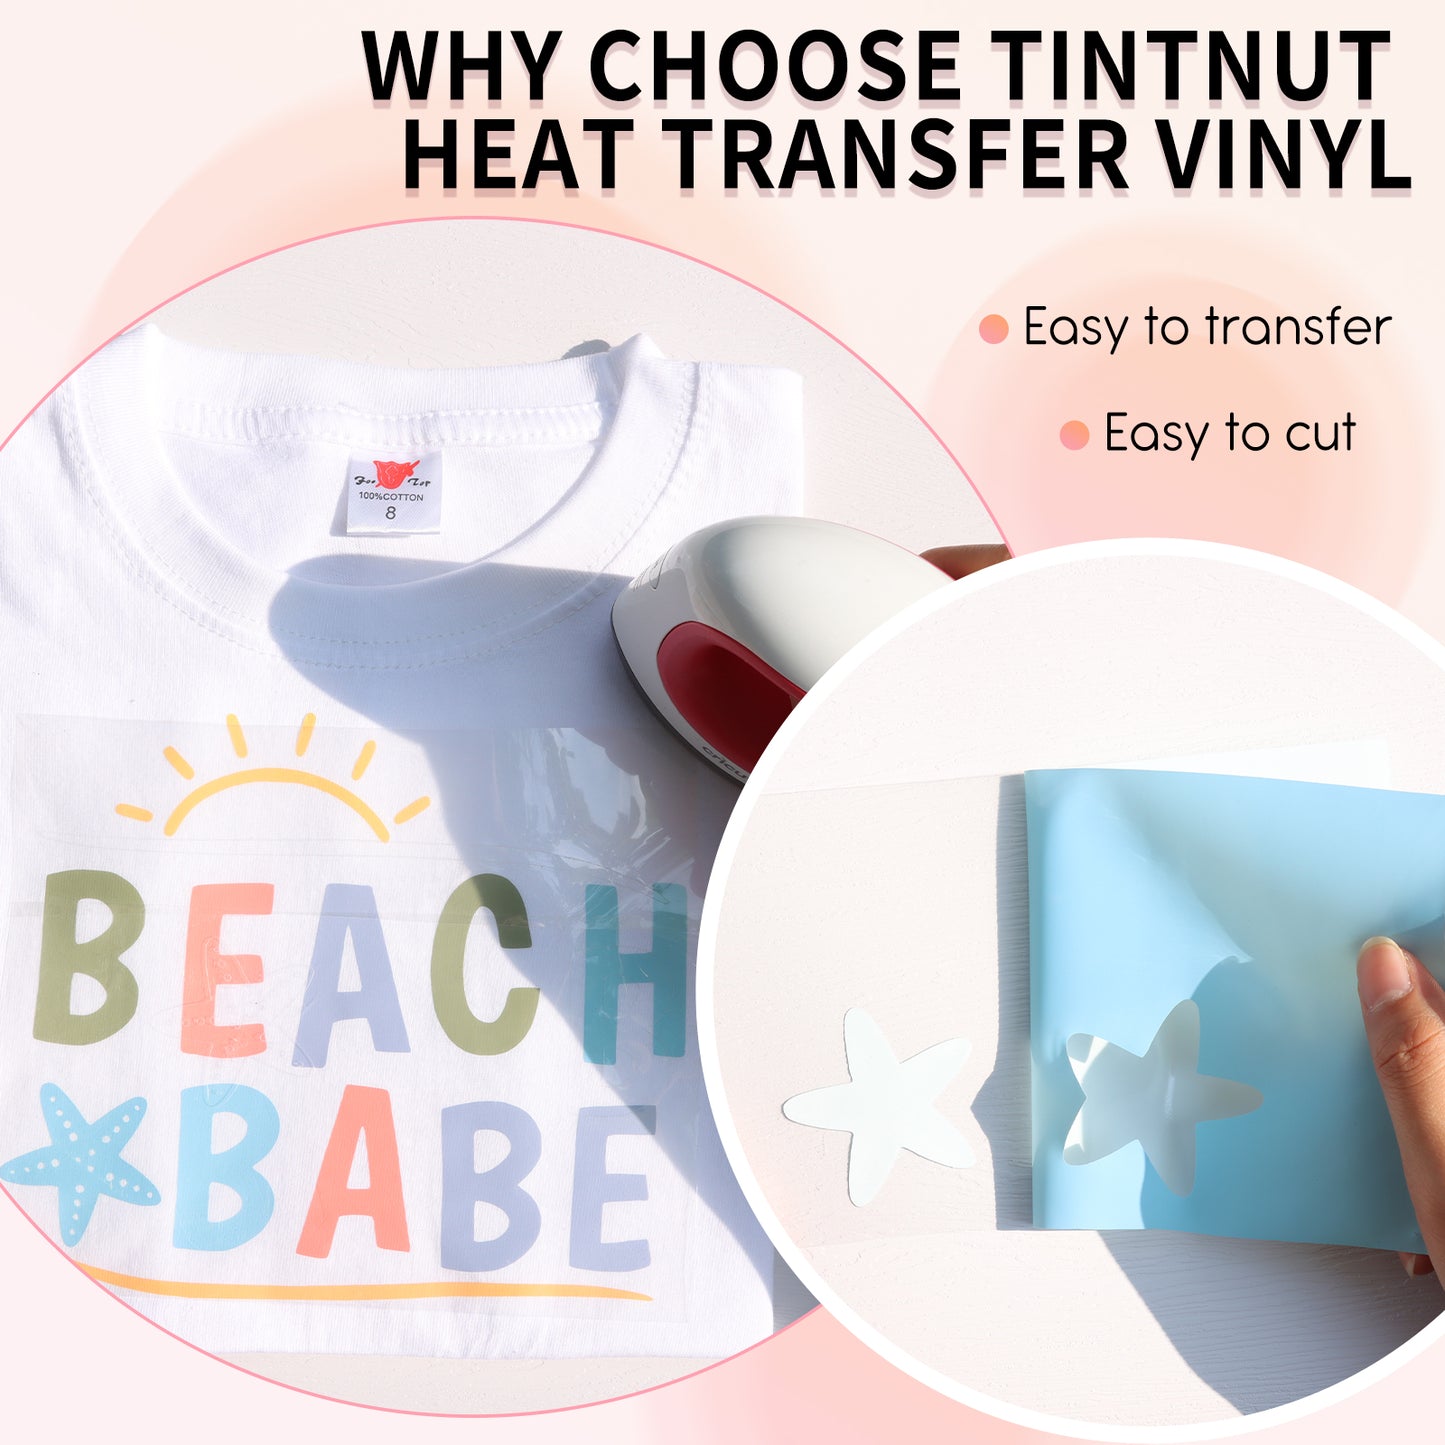 Tintnut Iron on Vinyl - 12 Sheets 12x10inch UV Color Changing Heat Transfer Vinyl Solid Sun Sunlight Sensitive HTV For T-Shirts Compatible with Cricut or Silhoutte Cameo